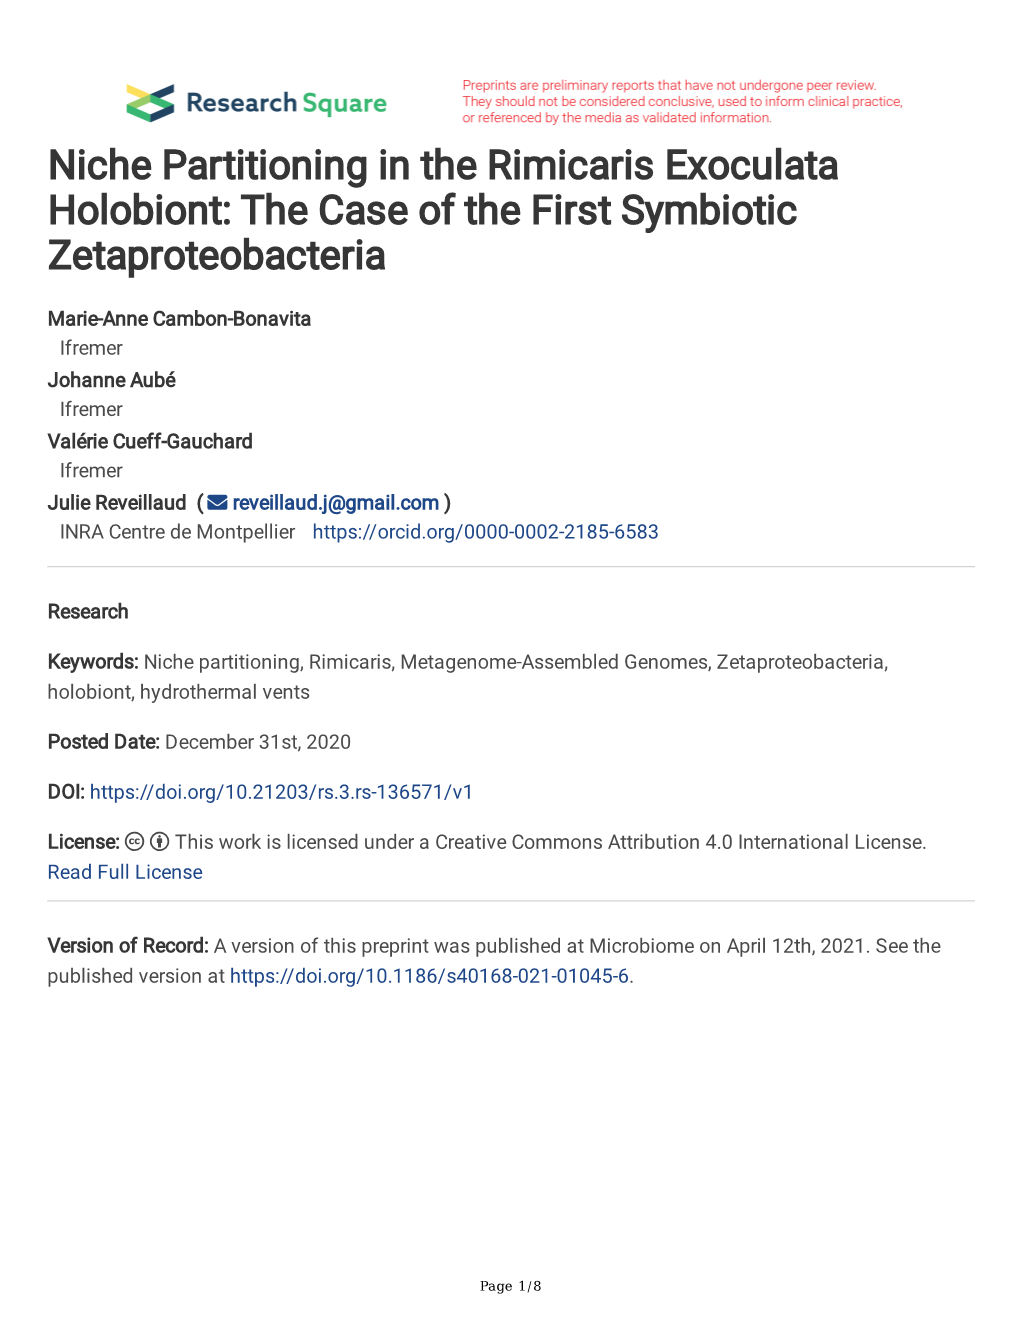 Niche Partitioning in the Rimicaris Exoculata Holobiont: the Case of the First Symbiotic Zetaproteobacteria